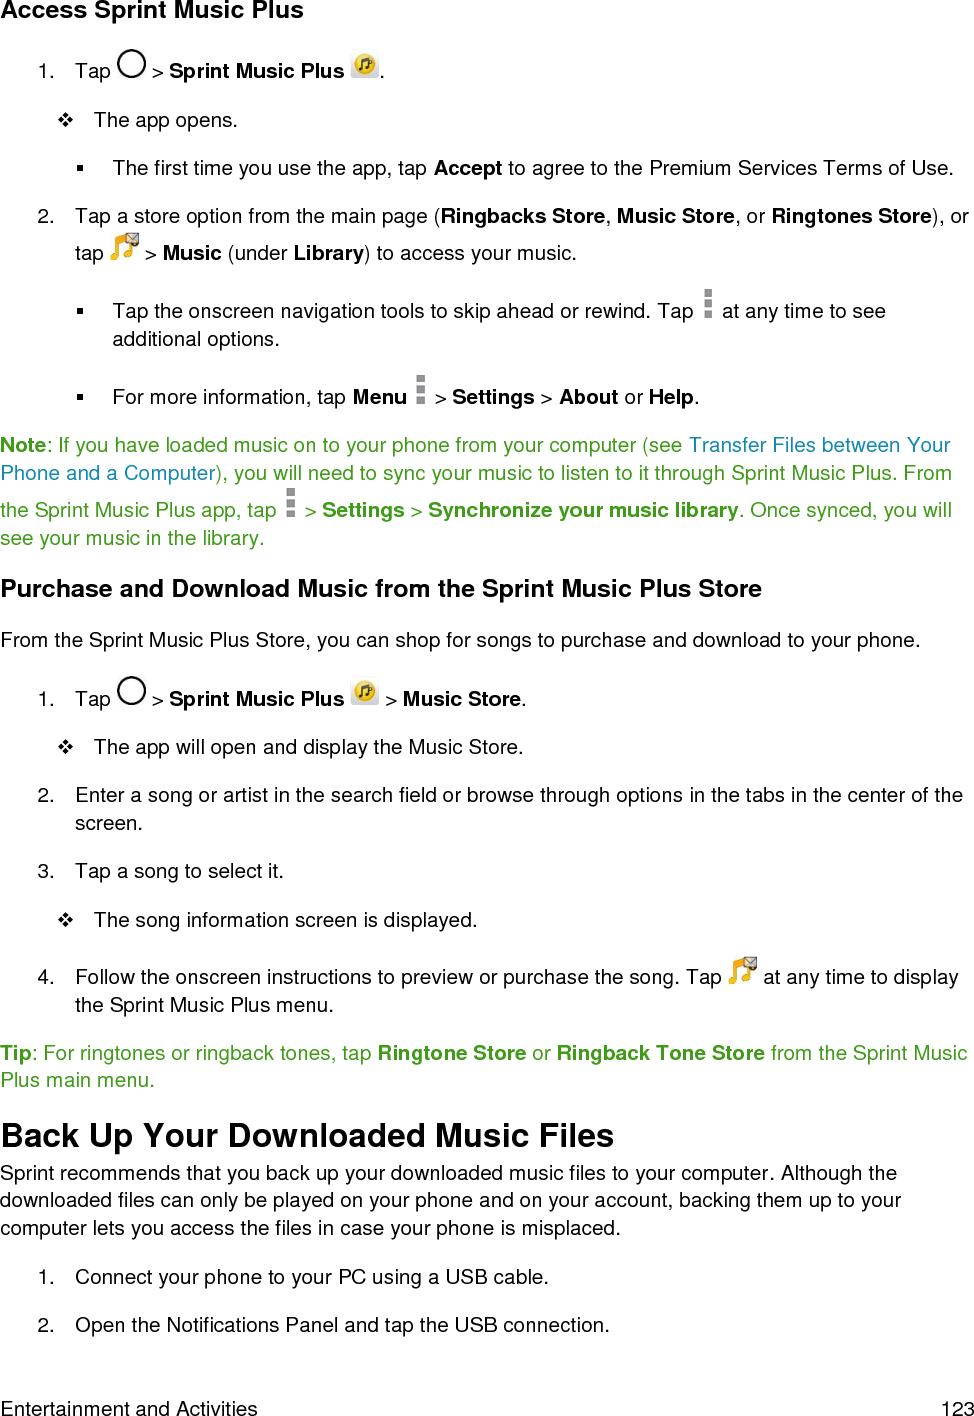  Entertainment and Activities  123 Access Sprint Music Plus 1.  Tap   &gt; Sprint Music Plus  .   The app opens.   The first time you use the app, tap Accept to agree to the Premium Services Terms of Use. 2.  Tap a store option from the main page (Ringbacks Store, Music Store, or Ringtones Store), or tap   &gt; Music (under Library) to access your music.   Tap the onscreen navigation tools to skip ahead or rewind. Tap   at any time to see additional options.   For more information, tap Menu   &gt; Settings &gt; About or Help. Note: If you have loaded music on to your phone from your computer (see Transfer Files between Your Phone and a Computer), you will need to sync your music to listen to it through Sprint Music Plus. From the Sprint Music Plus app, tap   &gt; Settings &gt; Synchronize your music library. Once synced, you will see your music in the library. Purchase and Download Music from the Sprint Music Plus Store From the Sprint Music Plus Store, you can shop for songs to purchase and download to your phone. 1.  Tap   &gt; Sprint Music Plus   &gt; Music Store.   The app will open and display the Music Store. 2.  Enter a song or artist in the search field or browse through options in the tabs in the center of the screen. 3.  Tap a song to select it.   The song information screen is displayed. 4.  Follow the onscreen instructions to preview or purchase the song. Tap   at any time to display the Sprint Music Plus menu. Tip: For ringtones or ringback tones, tap Ringtone Store or Ringback Tone Store from the Sprint Music Plus main menu. Back Up Your Downloaded Music Files Sprint recommends that you back up your downloaded music files to your computer. Although the downloaded files can only be played on your phone and on your account, backing them up to your computer lets you access the files in case your phone is misplaced.  1.  Connect your phone to your PC using a USB cable. 2.  Open the Notifications Panel and tap the USB connection. 